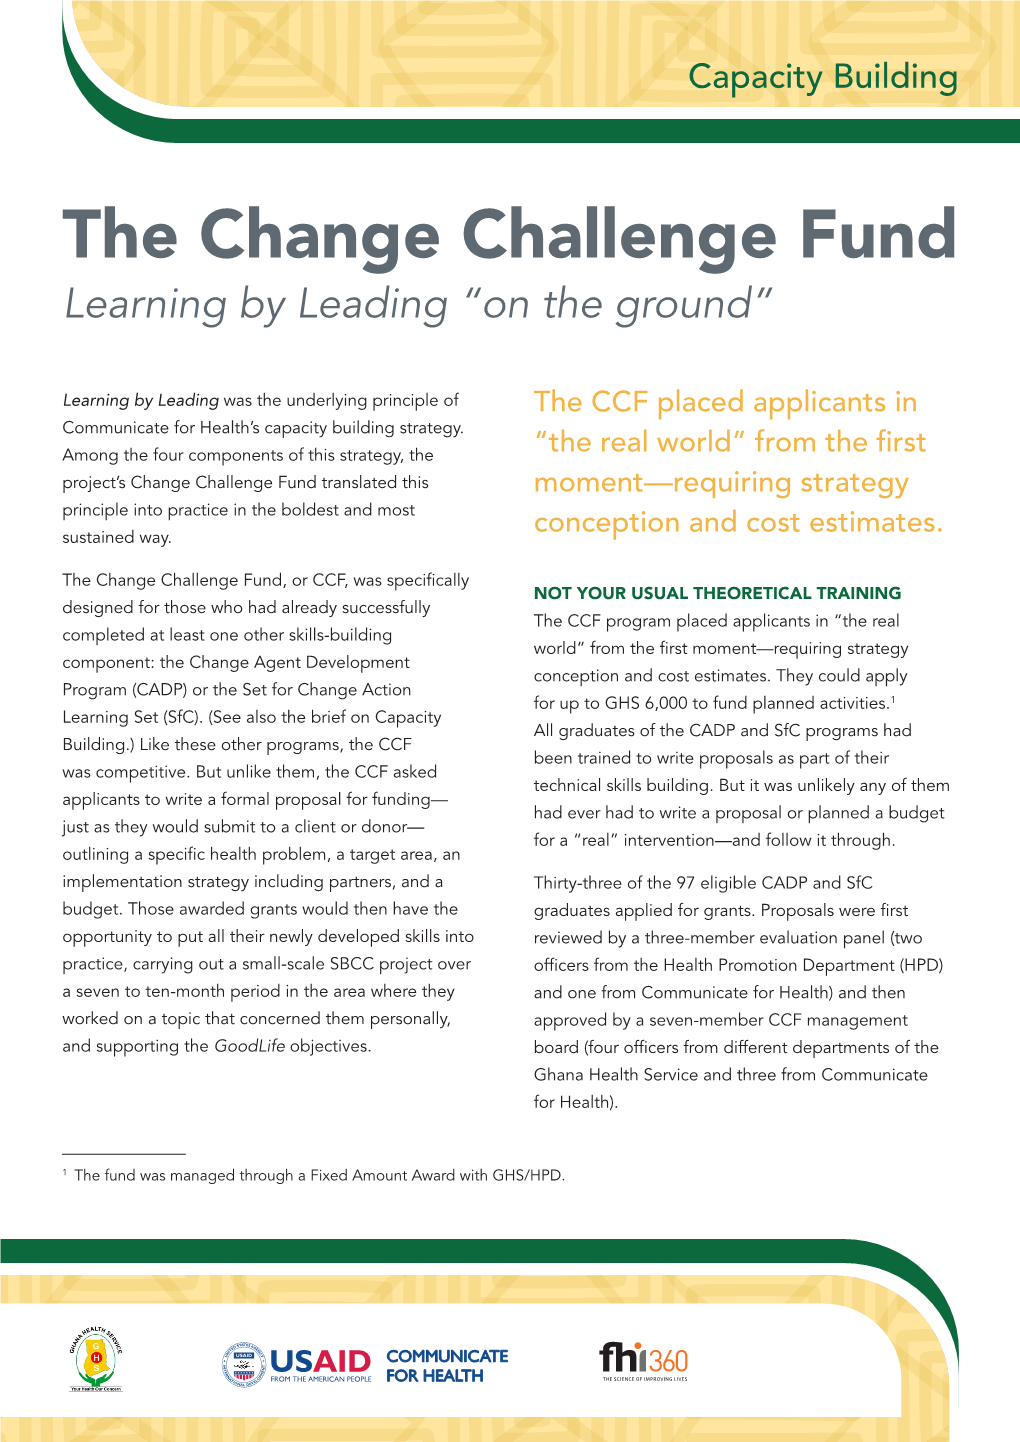 The Change Challenge Fund Learning by Leading “On the Ground”